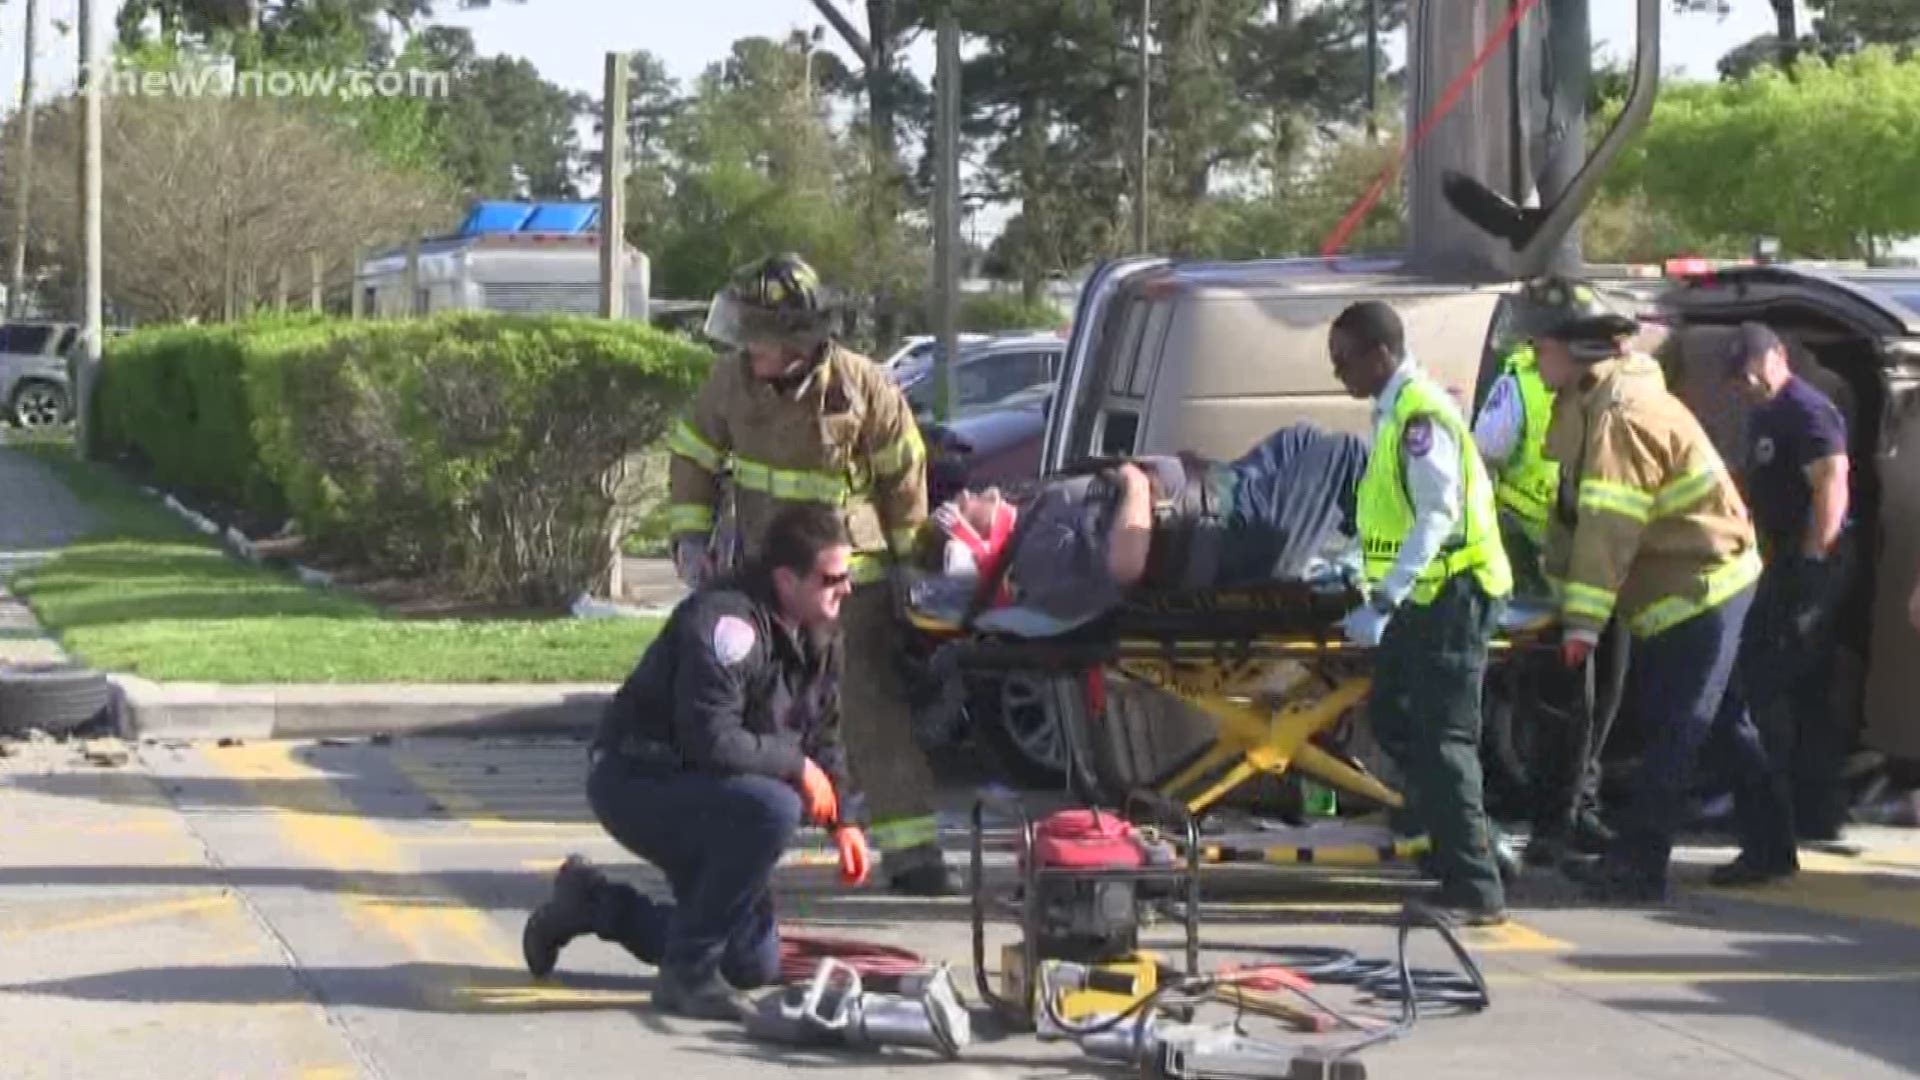 A man had to be removed from a vehicle using the Jaws of Life.